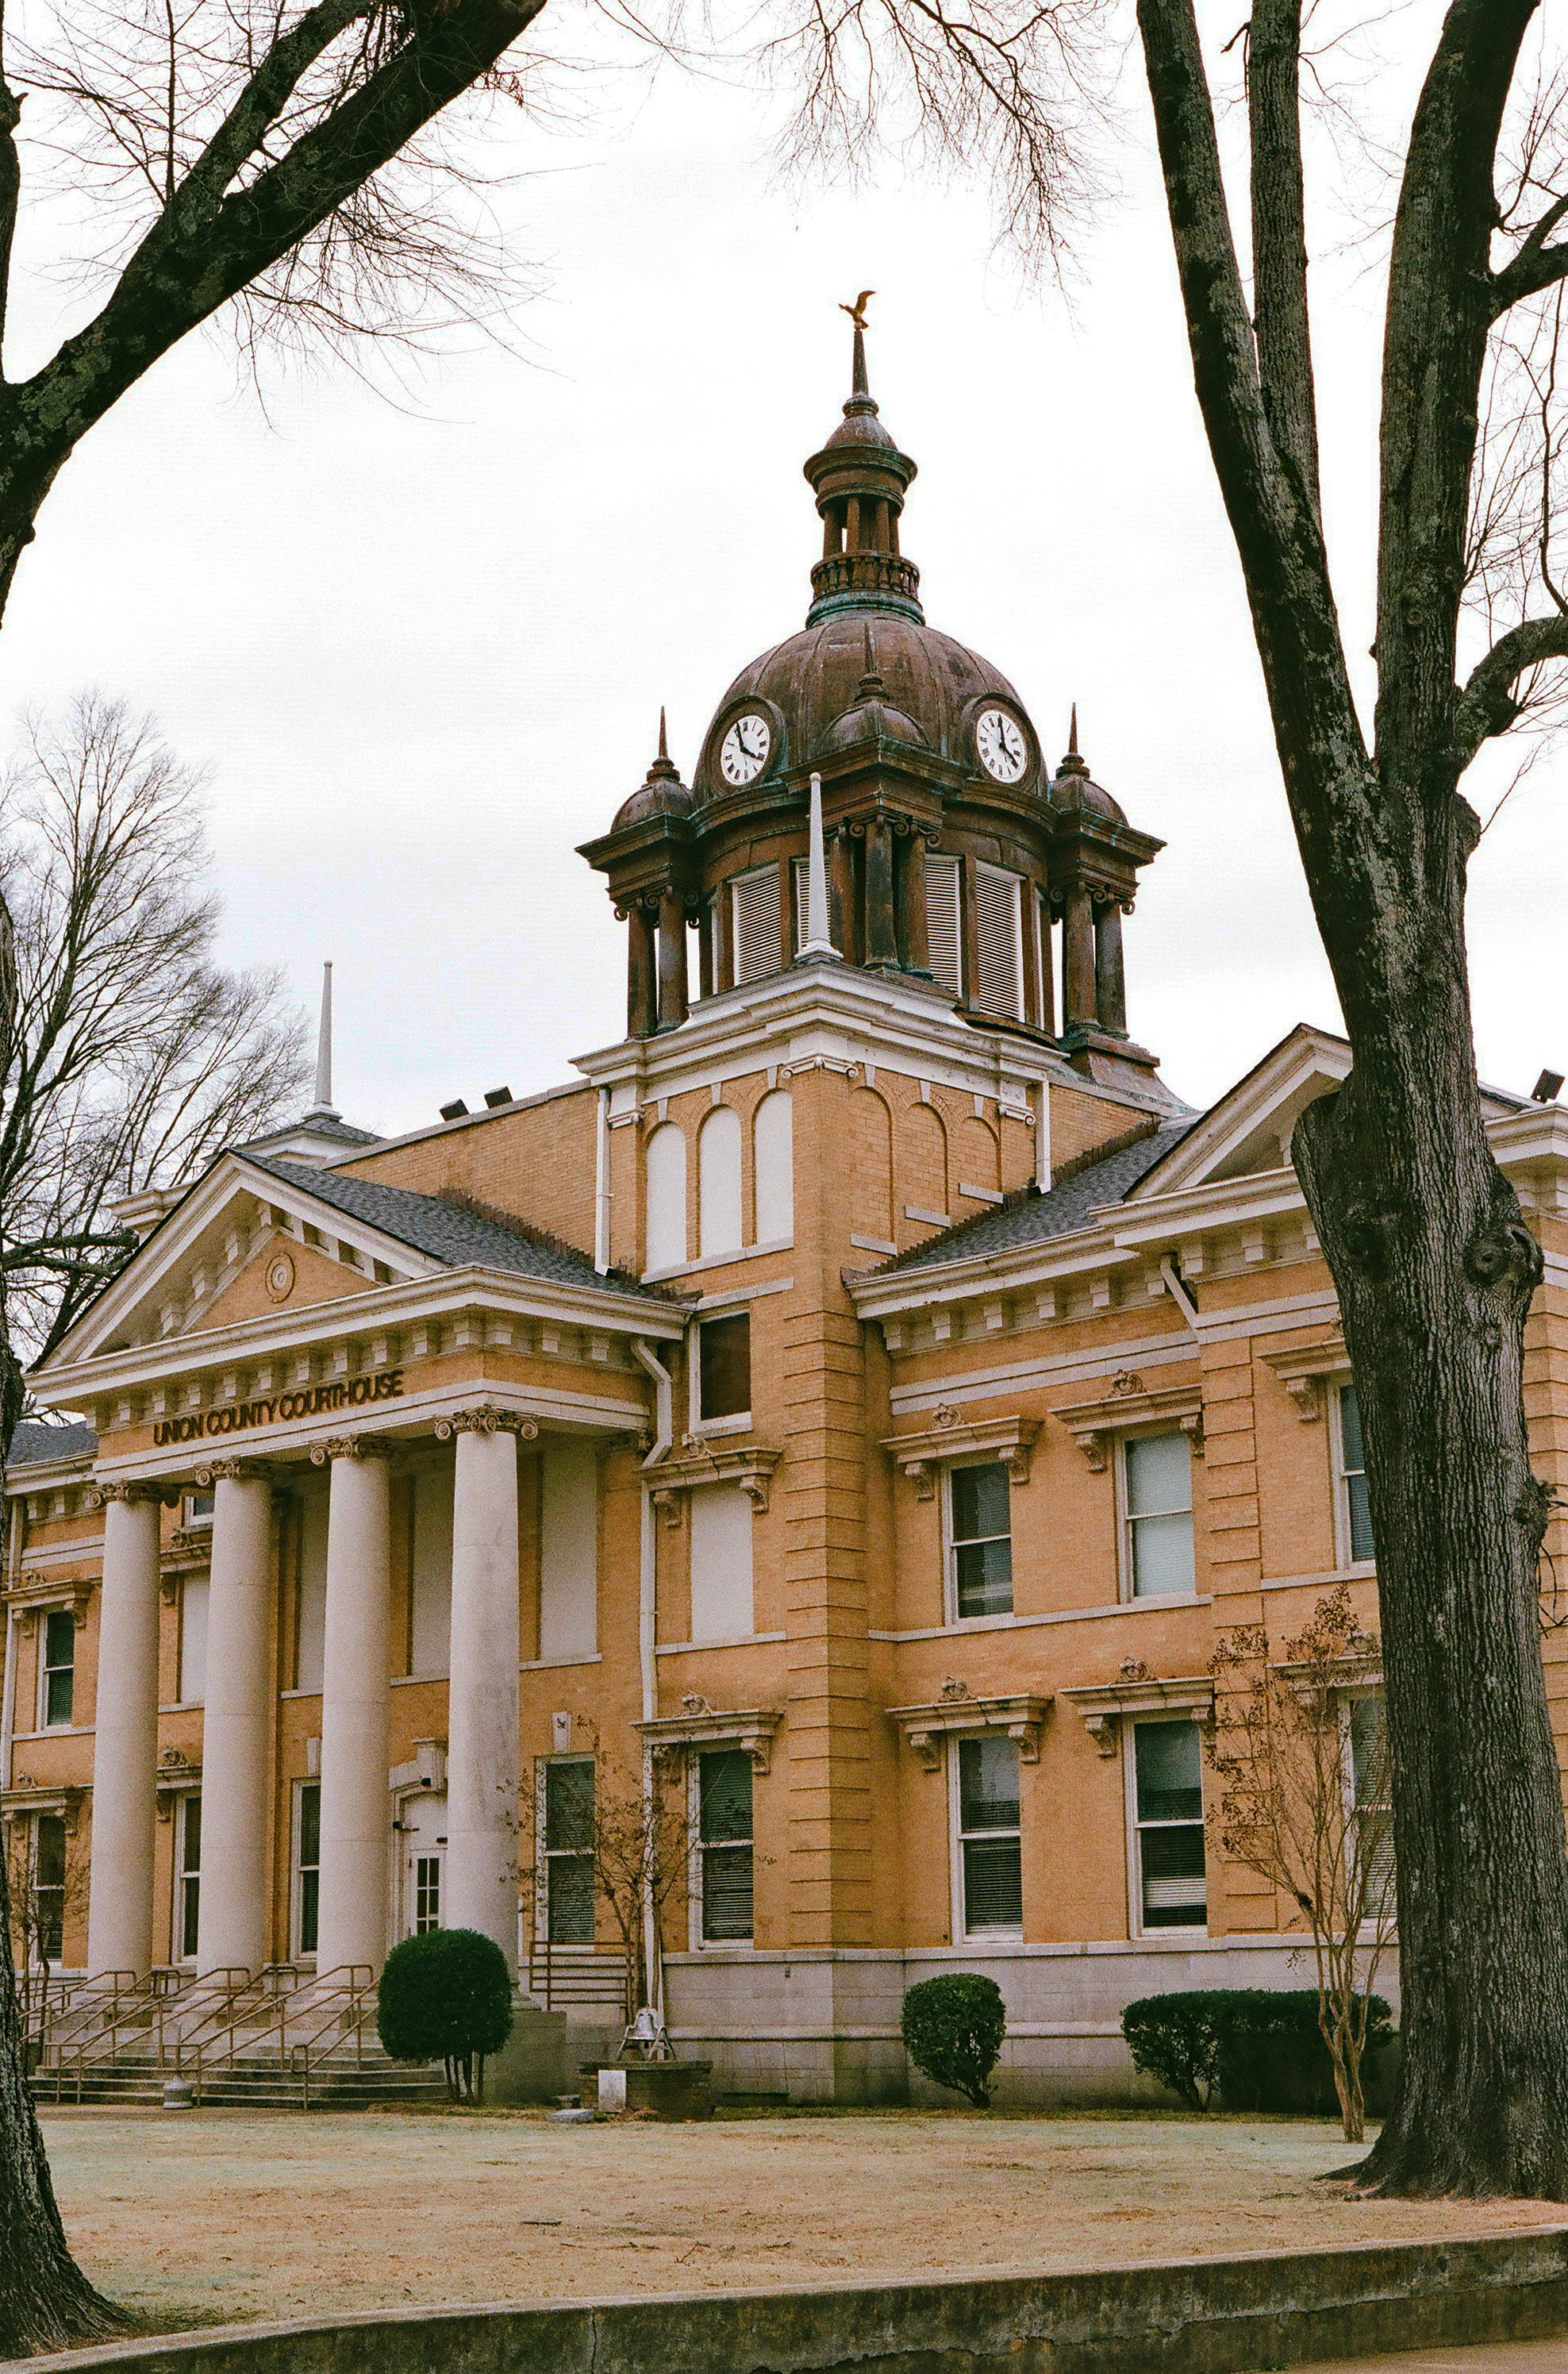  Another view of the courthouse, this time using Fuji Superia 400 shot with my Contax G2 and edited in ACDSee Ultra 